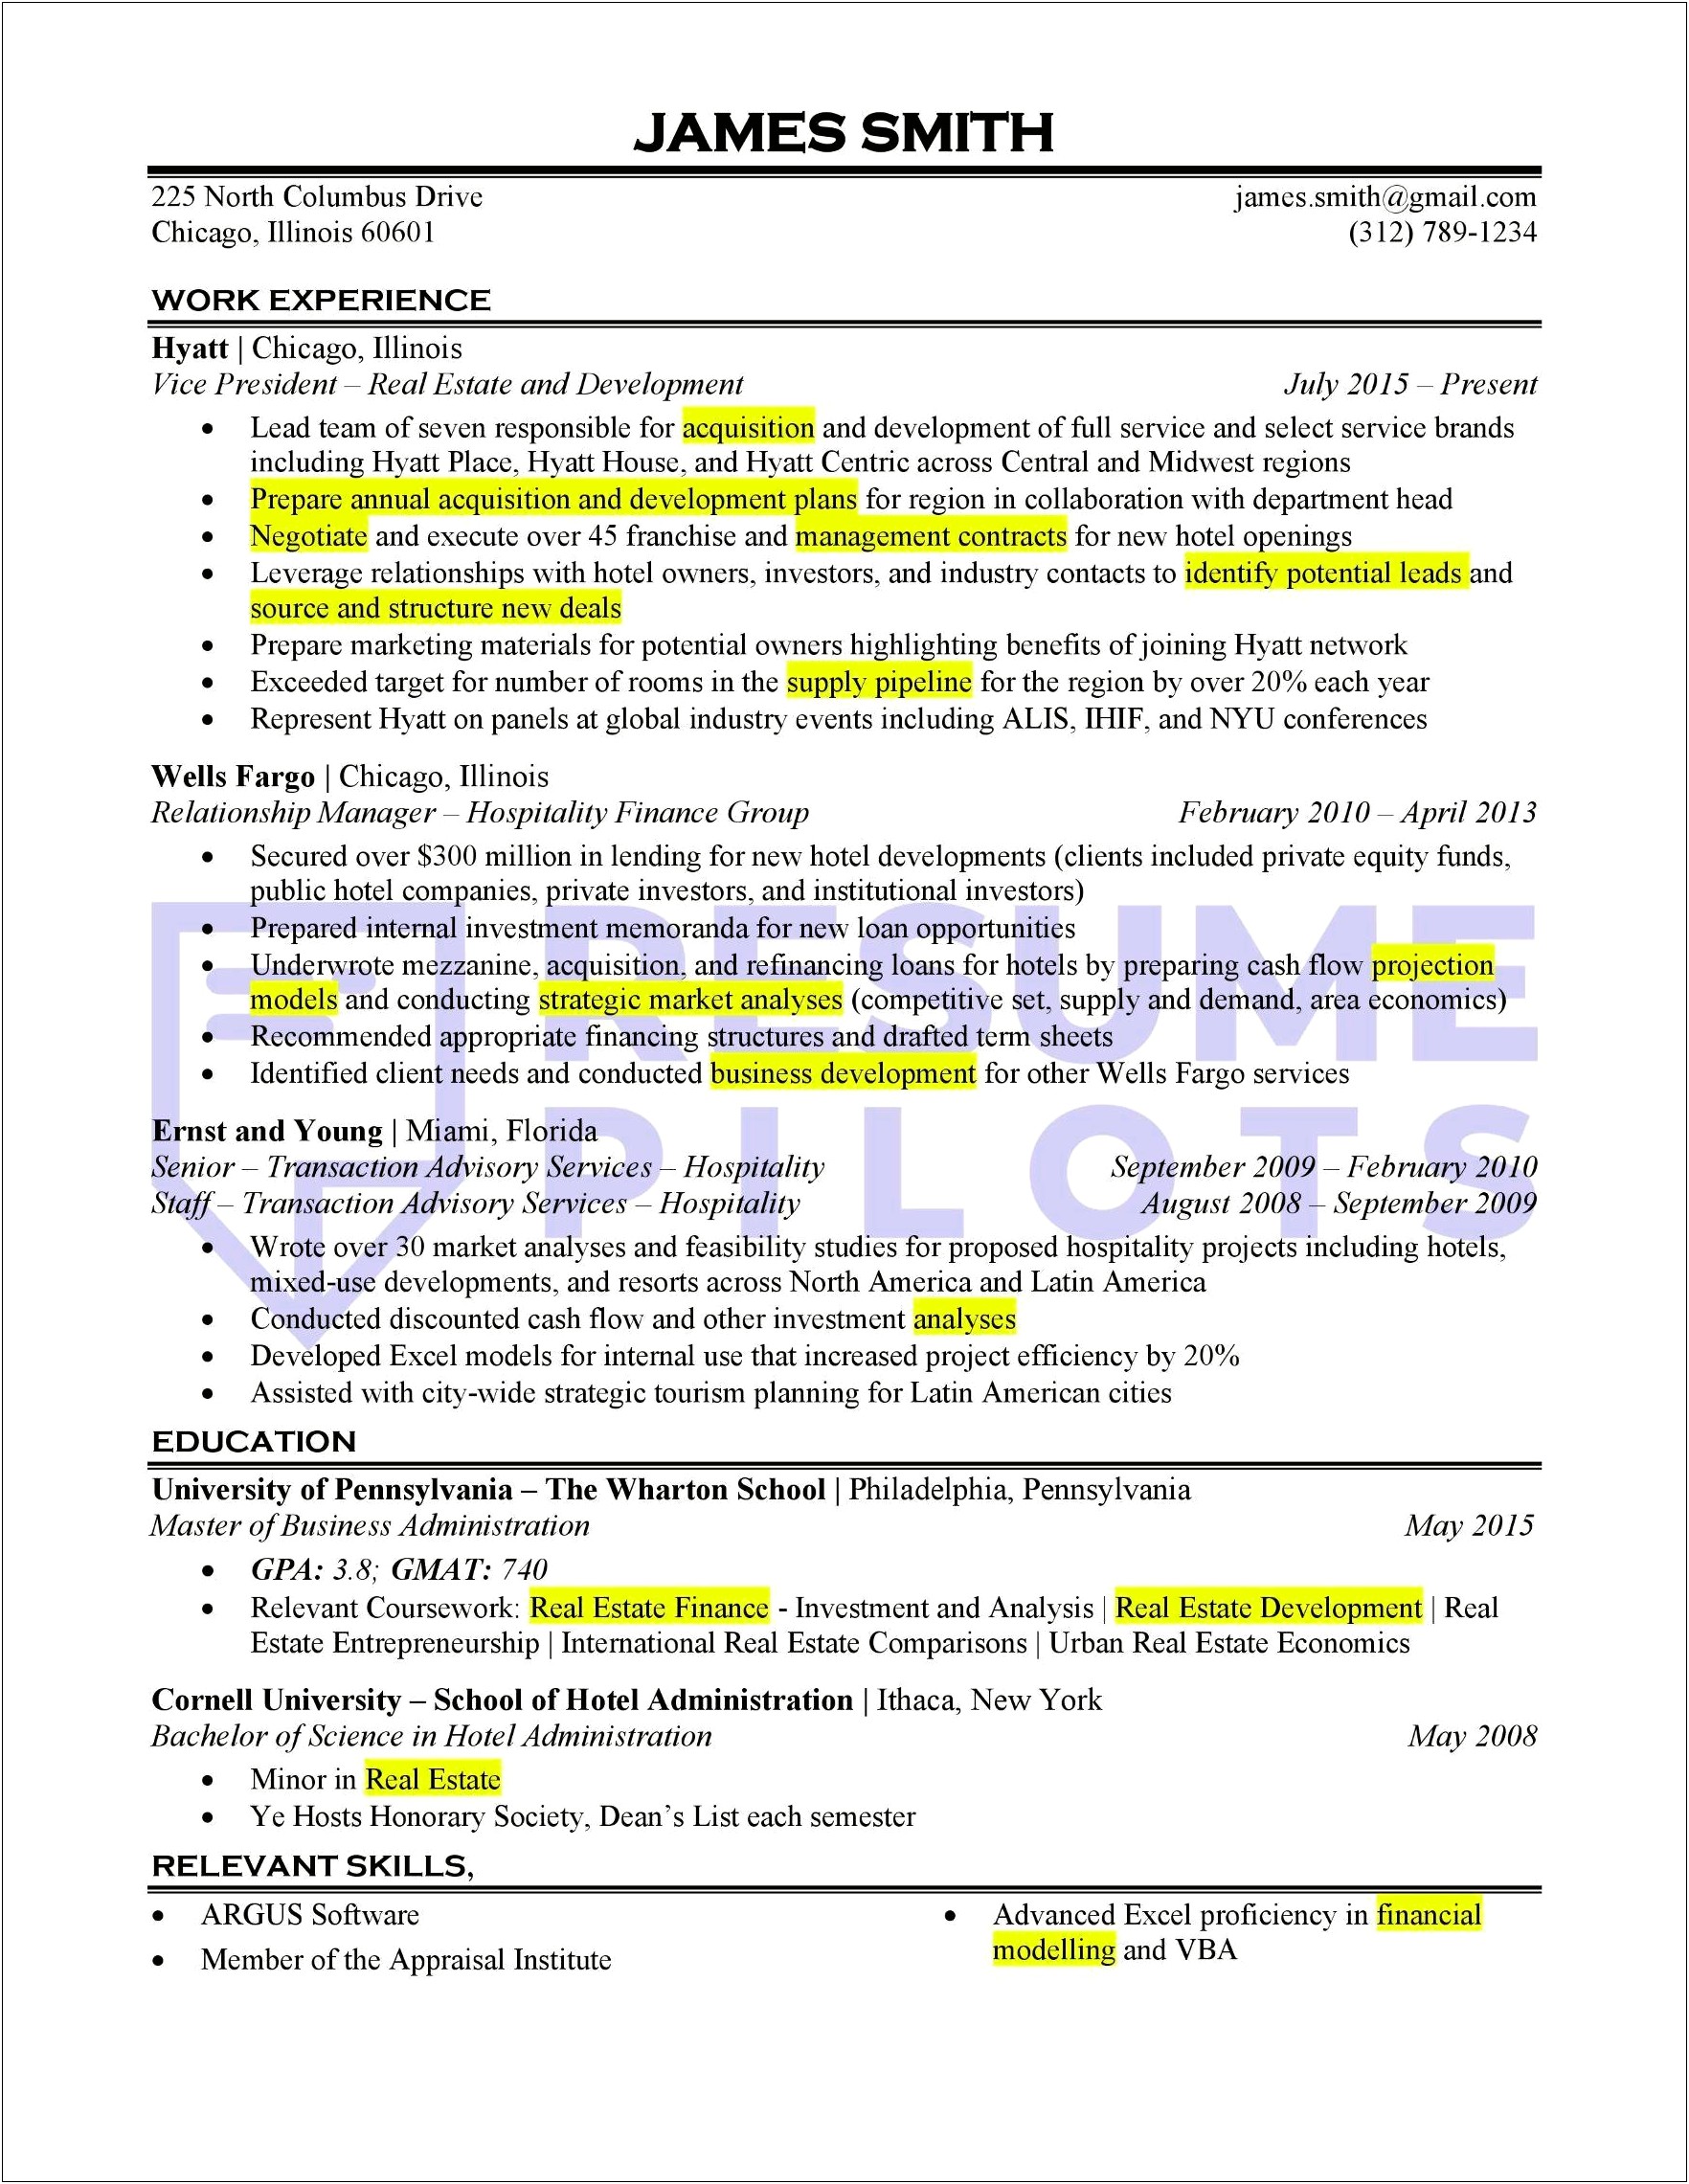 Proram That Scans For Resume Key Words